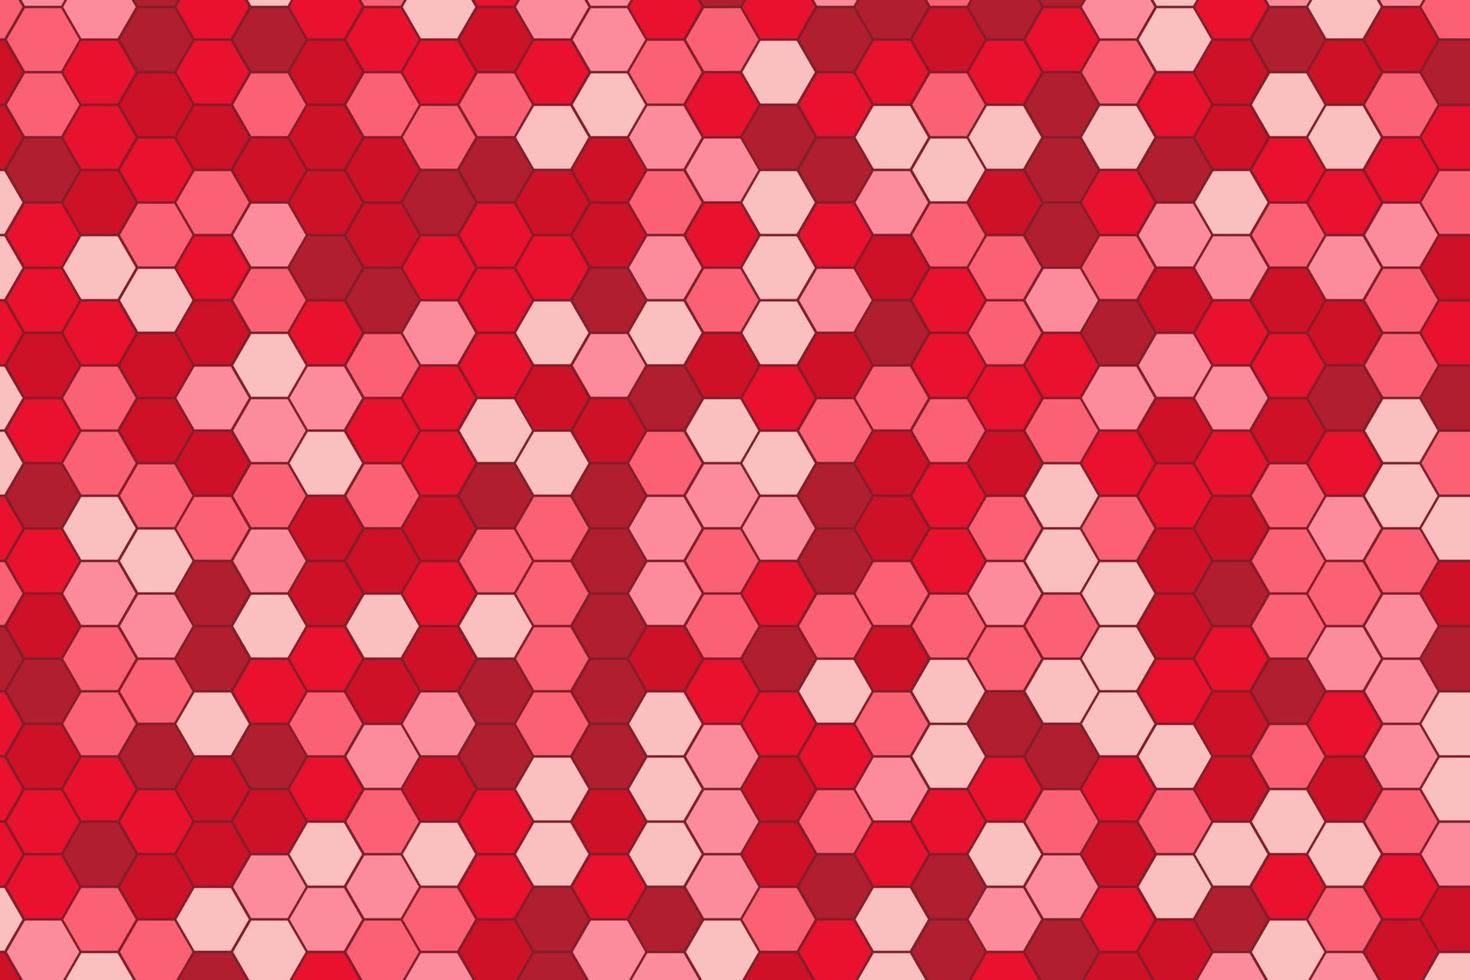 Pattern with honeycomb geometric elements in red tones. Abstract Gradient Background vector